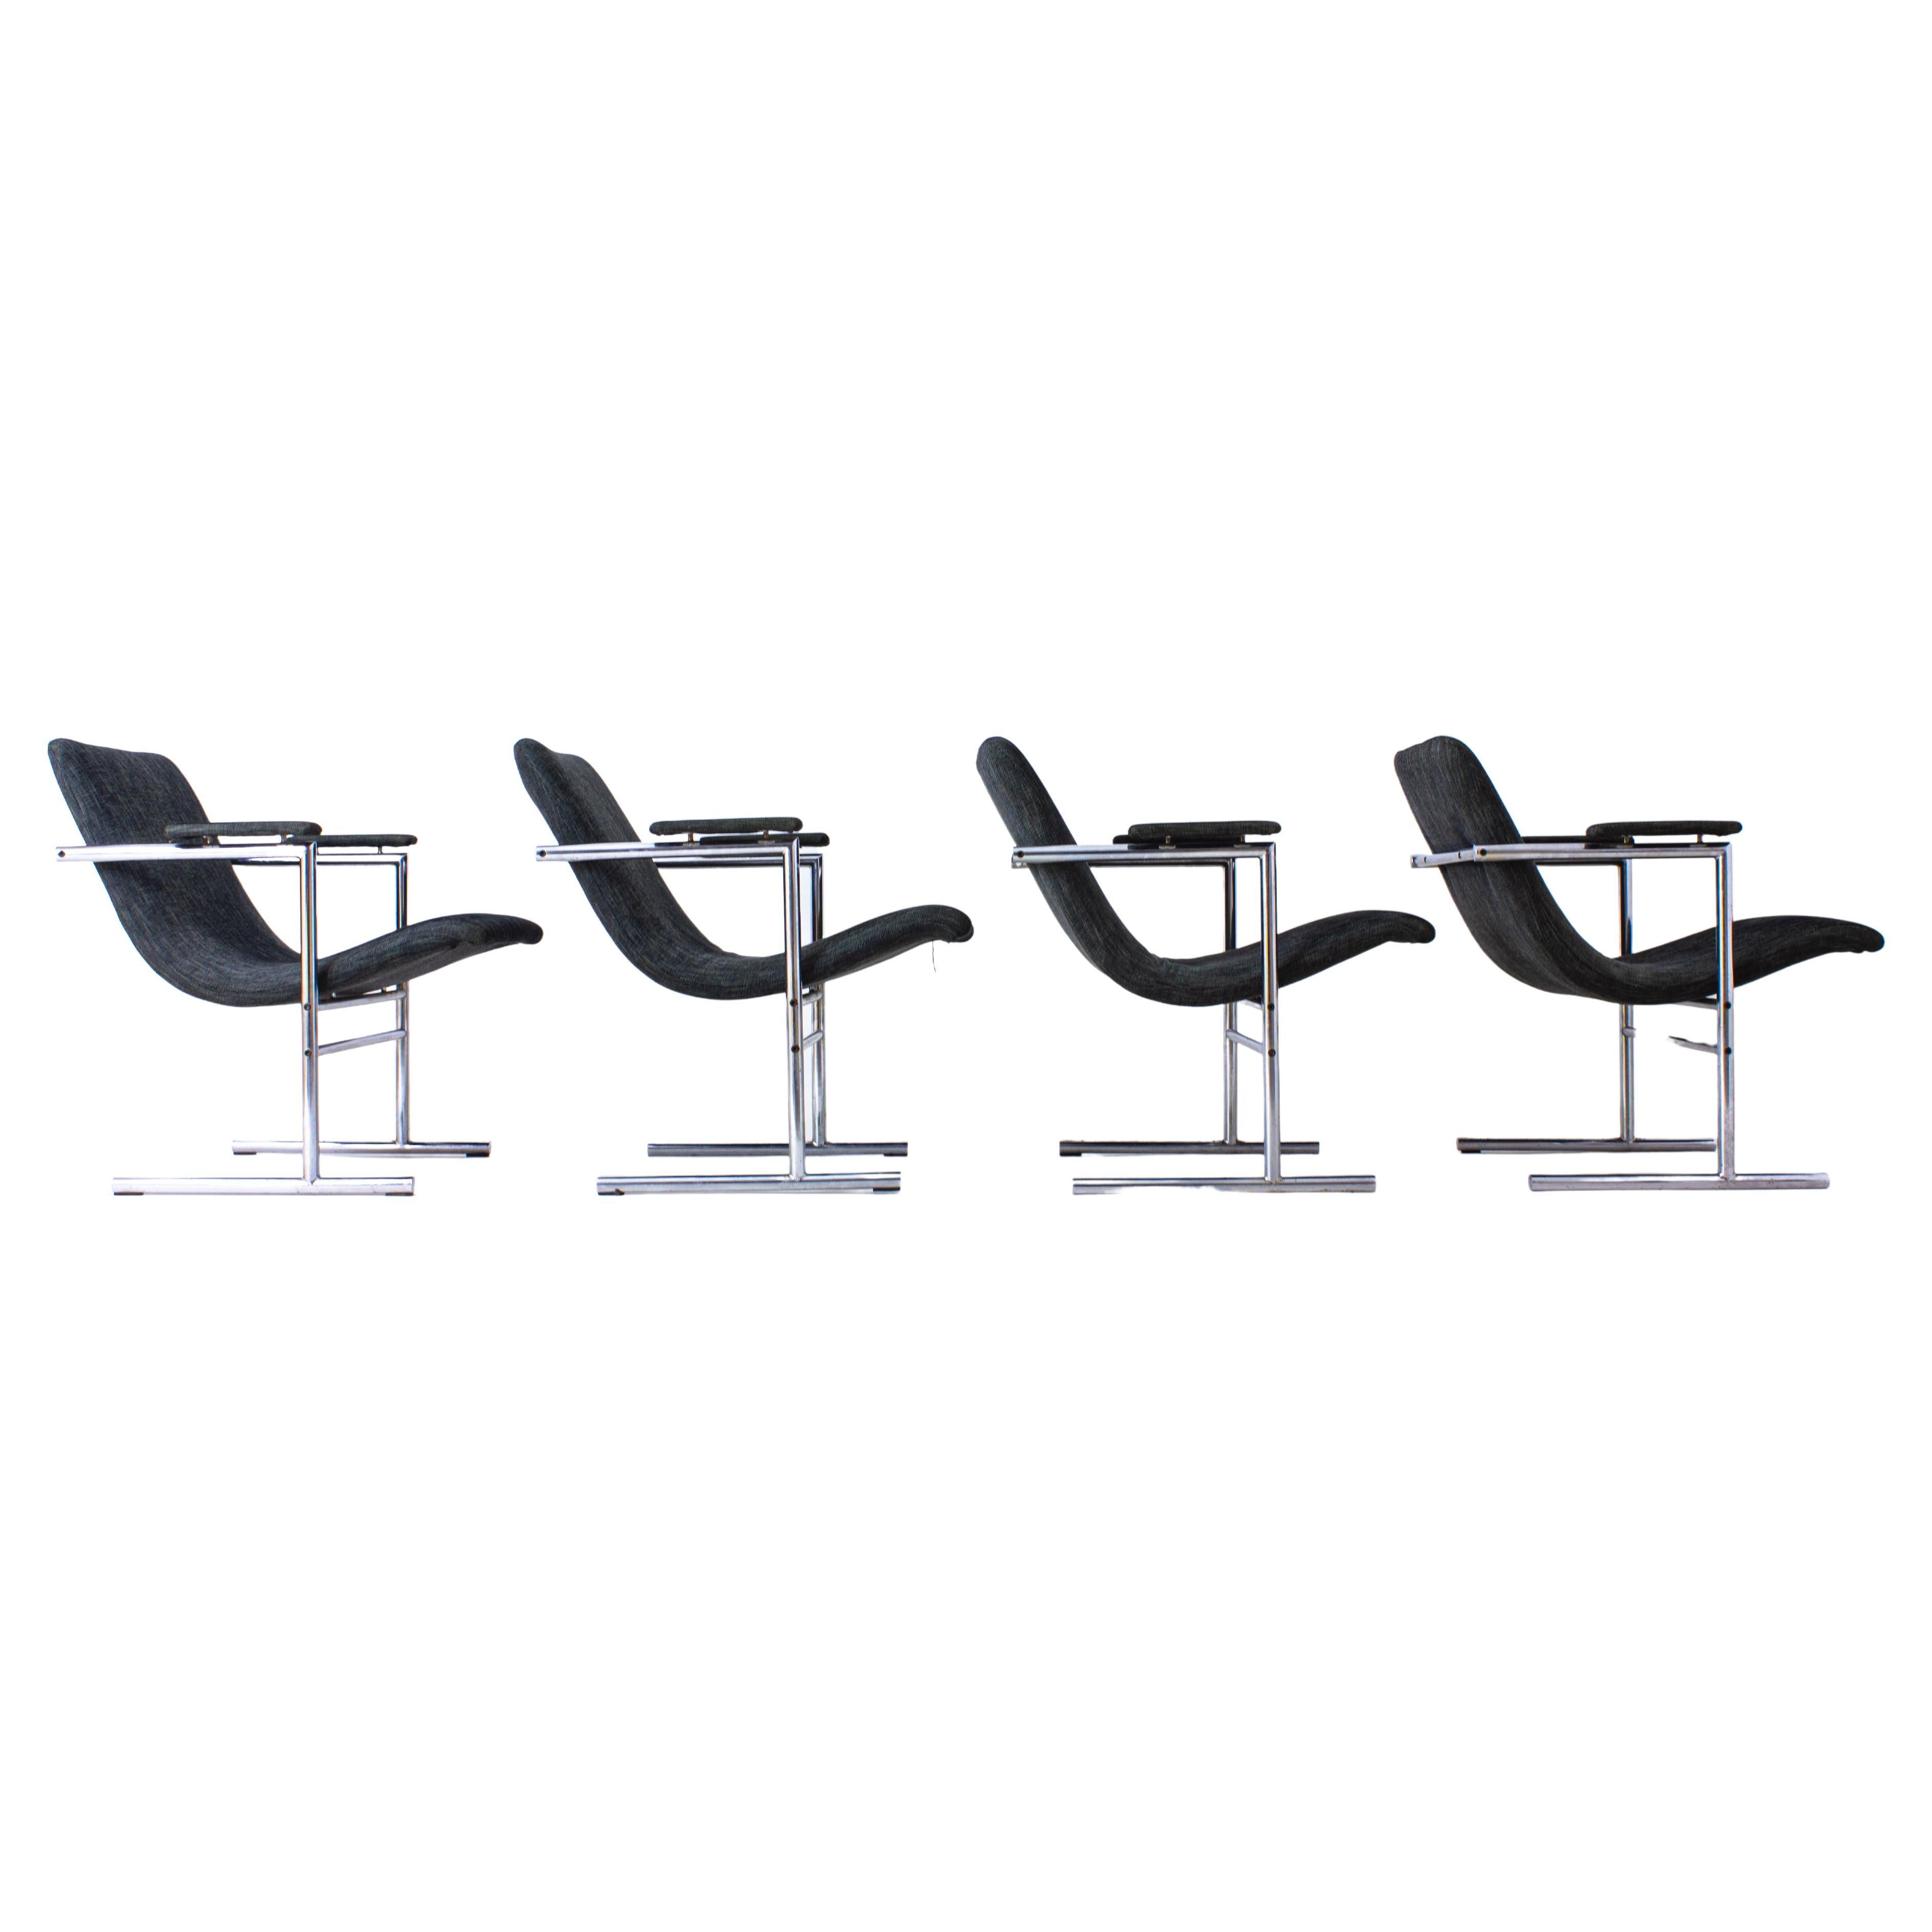 Set of 4 "Oslo" Chairs by Rudi Verelst for Novalux, Belgium, 1960s For Sale